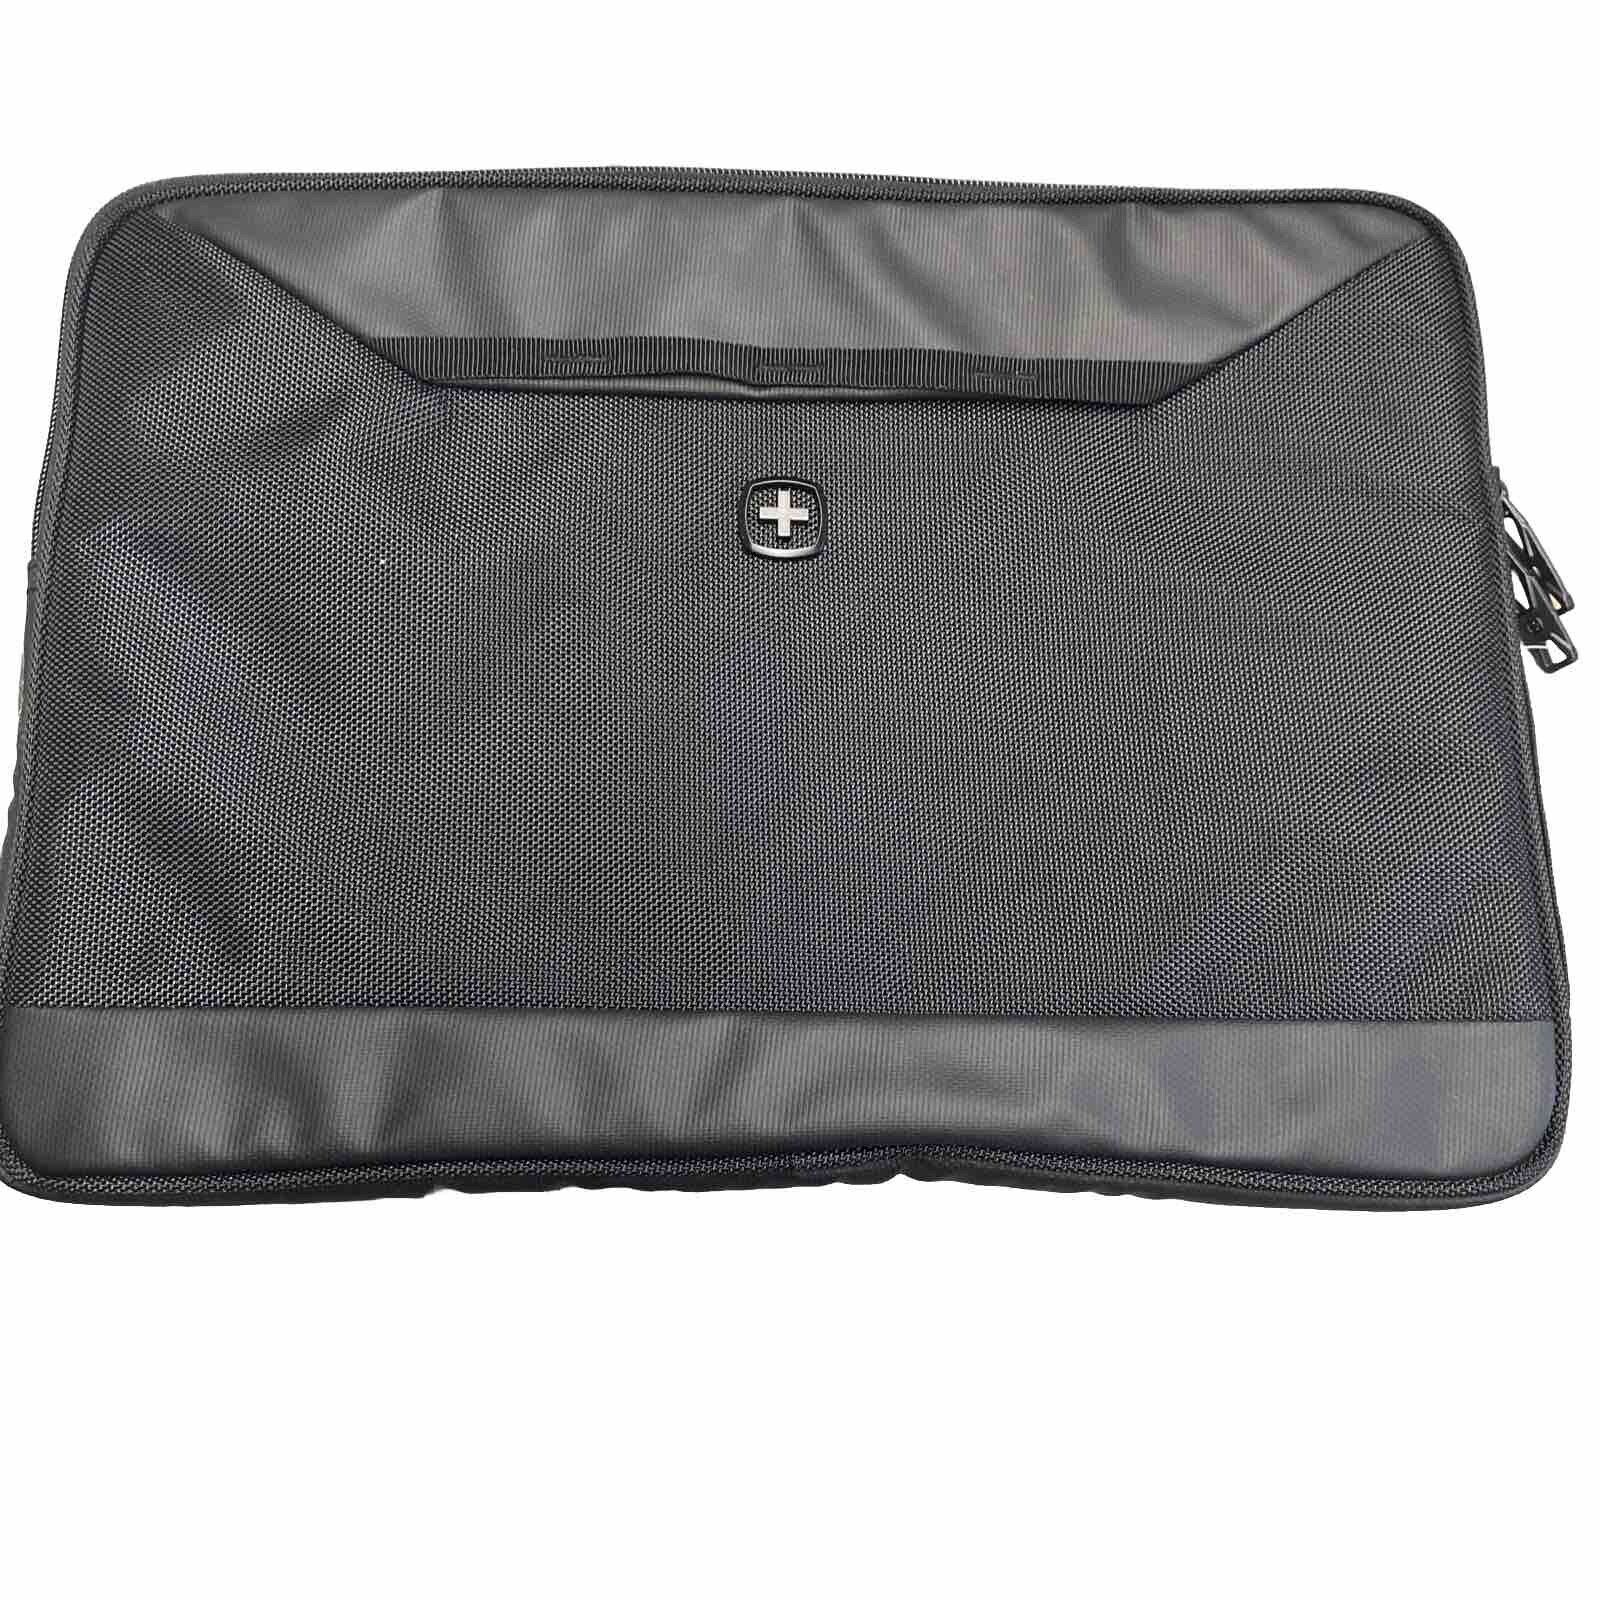 Swiss Gear Black Slim Protective Zippered Lined Laptop /Tablet Sleeve Accessory